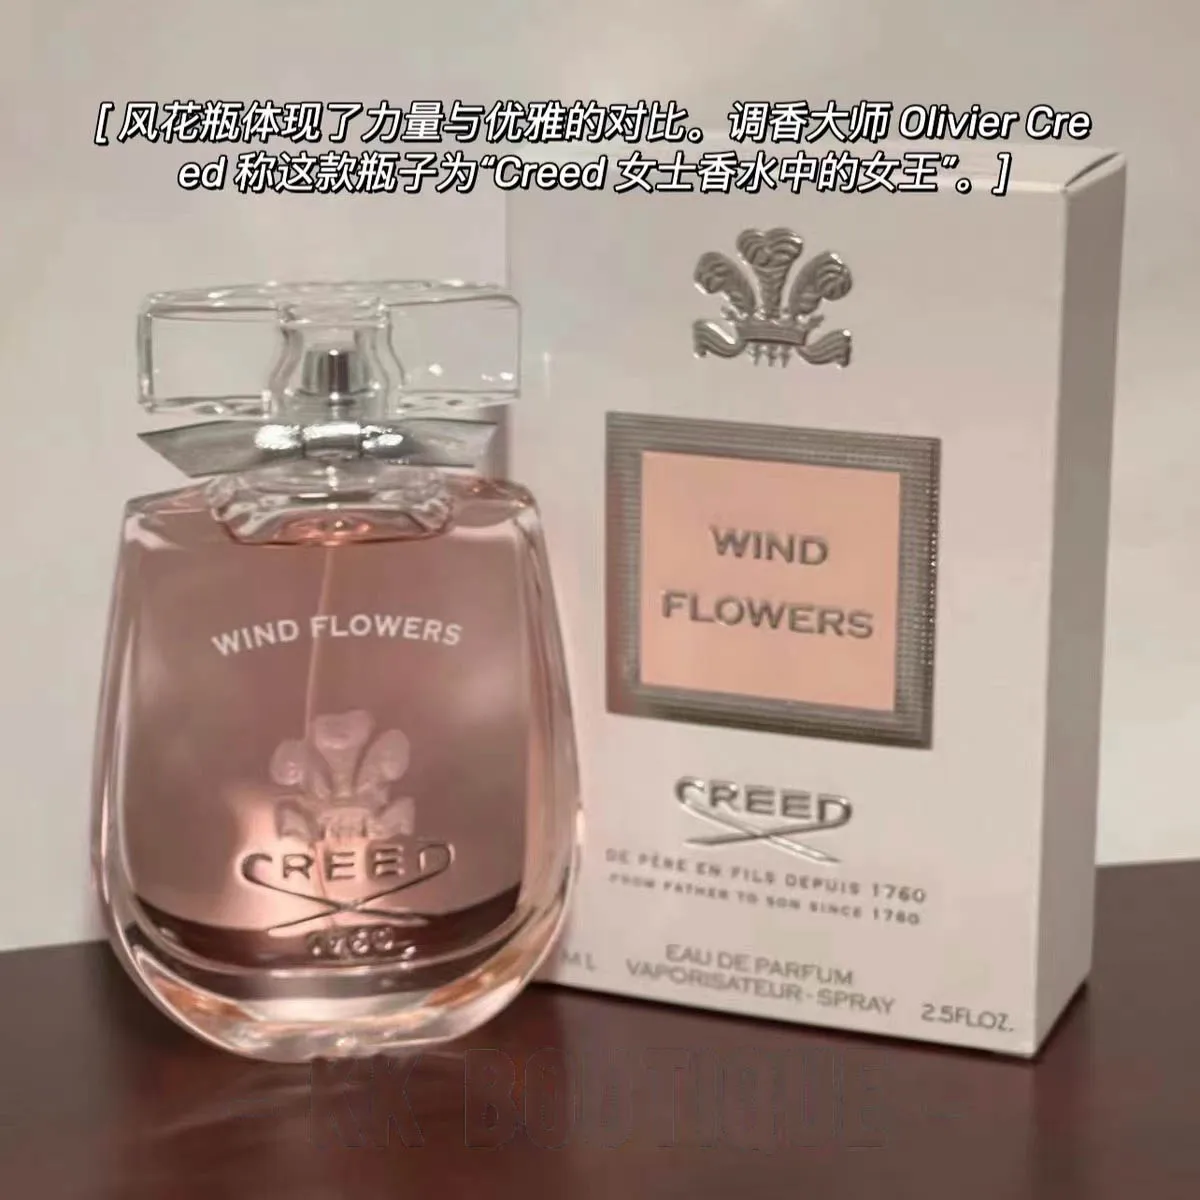 

High Quality Perfumes Creed Wind Flowers Long Lasting Fragrances for Women Original Parfumes for Women Women's Deodorant